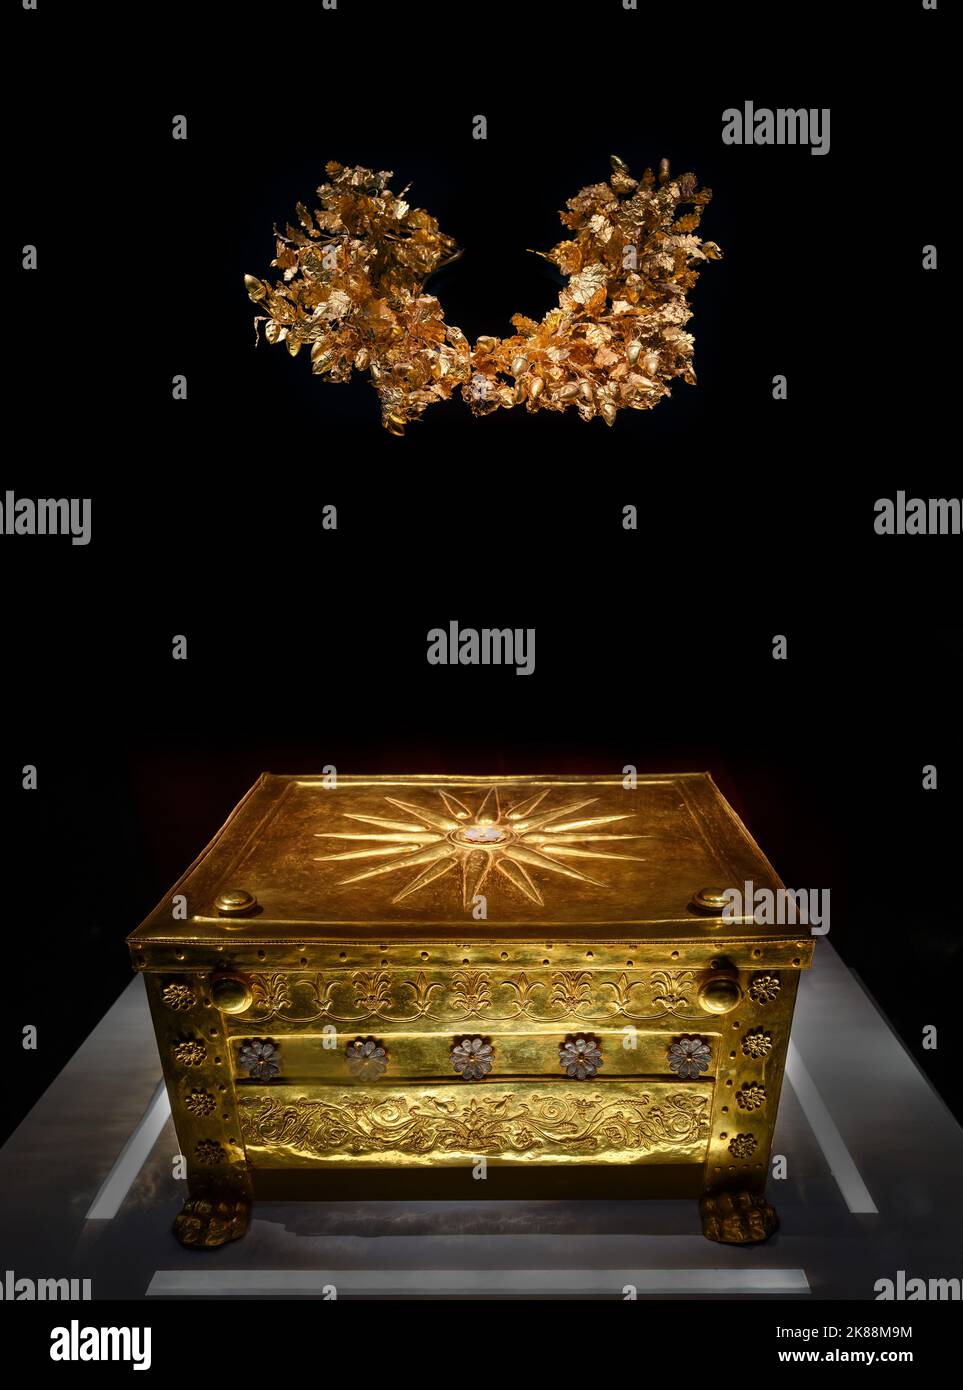 Grave crown and the gold burial casket for the bones of King Philip II of Macedon,  Museum of the Royal Tombs of Aigai, Vergina, Macedonia, Greece Stock Photo